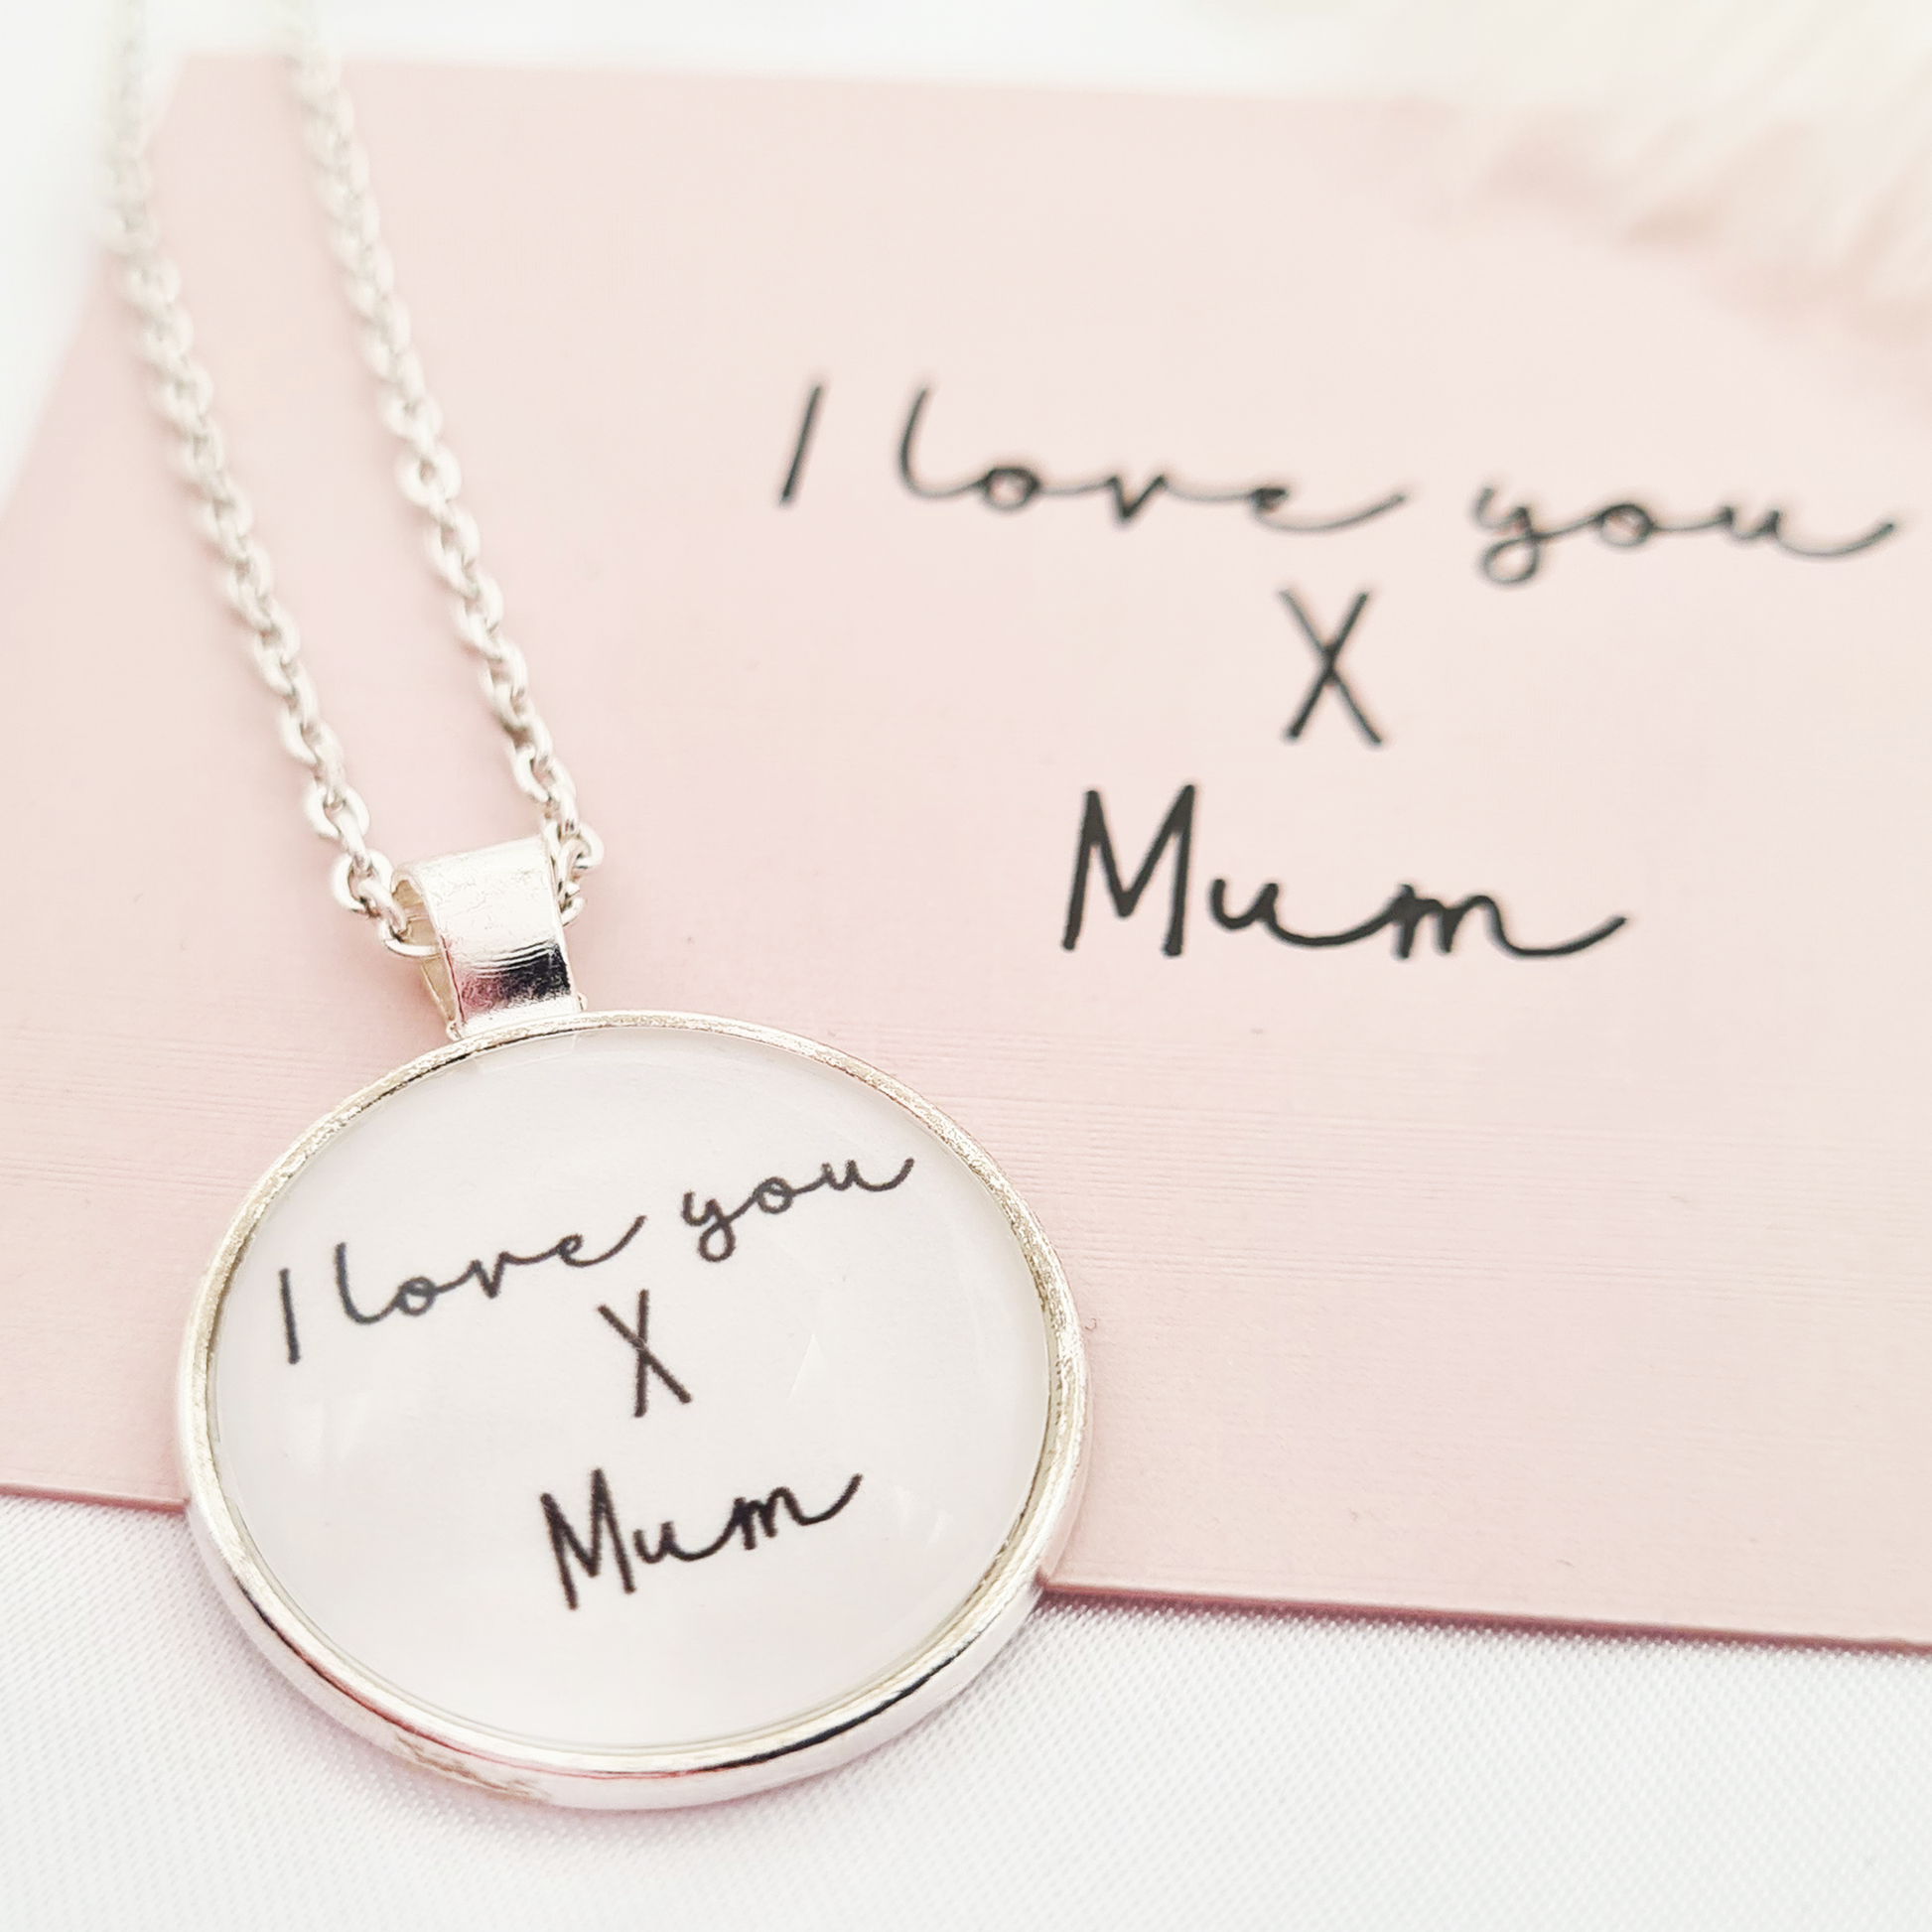 Personalised handwriting necklace and pendant with pink card in background